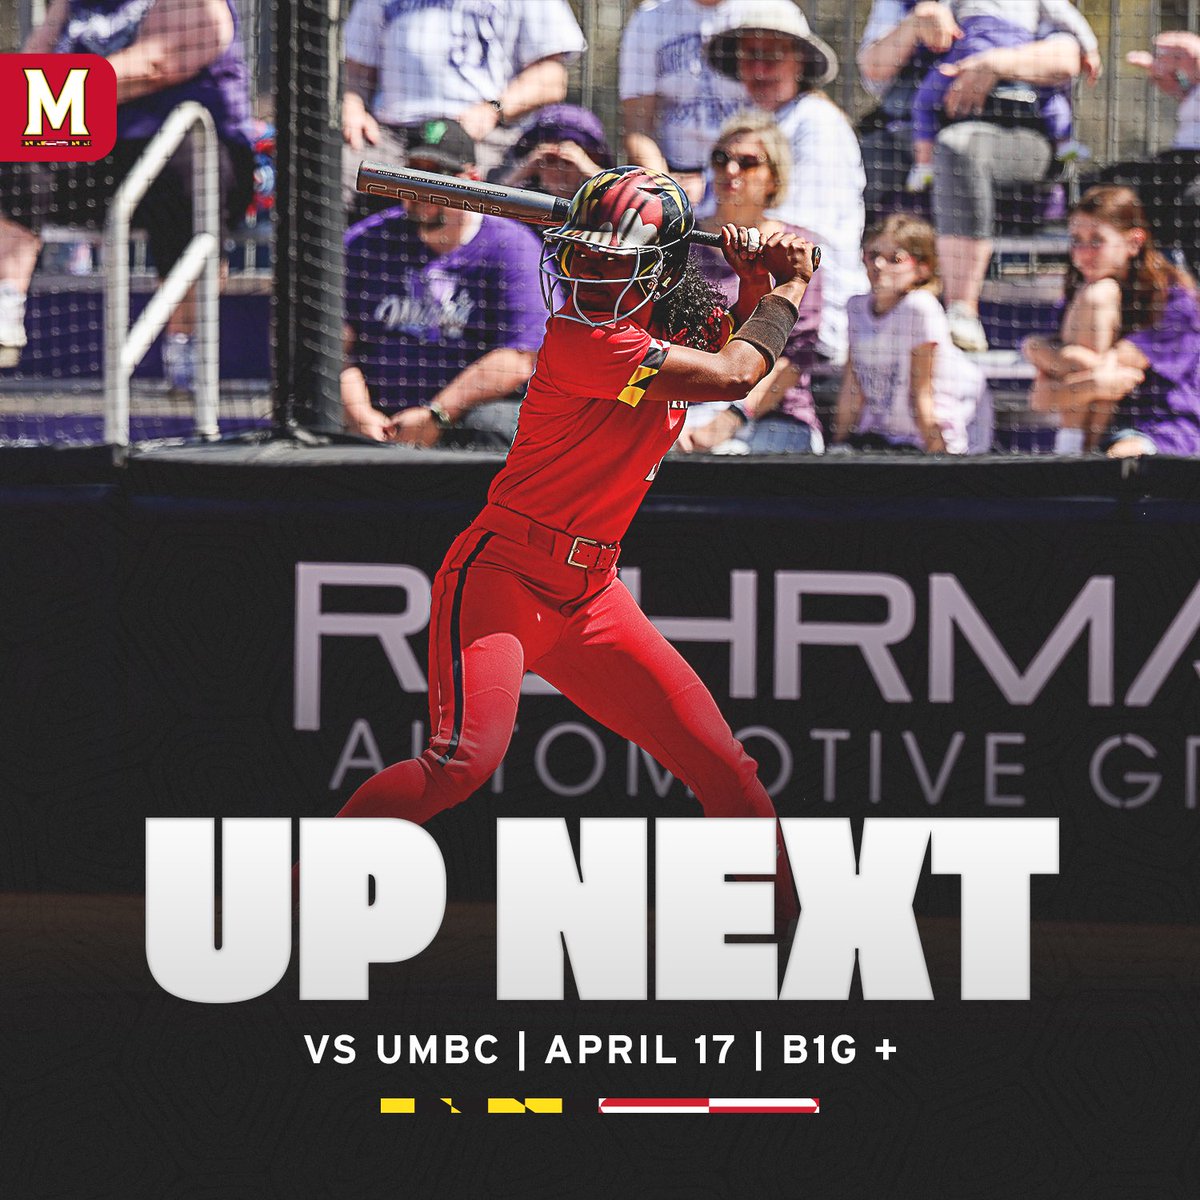 𝐔𝐩 𝐍𝐞𝐱𝐭 ‼️

Maryland is set to host UMBC on Wednesday at 6:00 p.m. for a midweek matchup. 

🔗: go.umd.edu/4aXl1n2

#FearTheTurtle